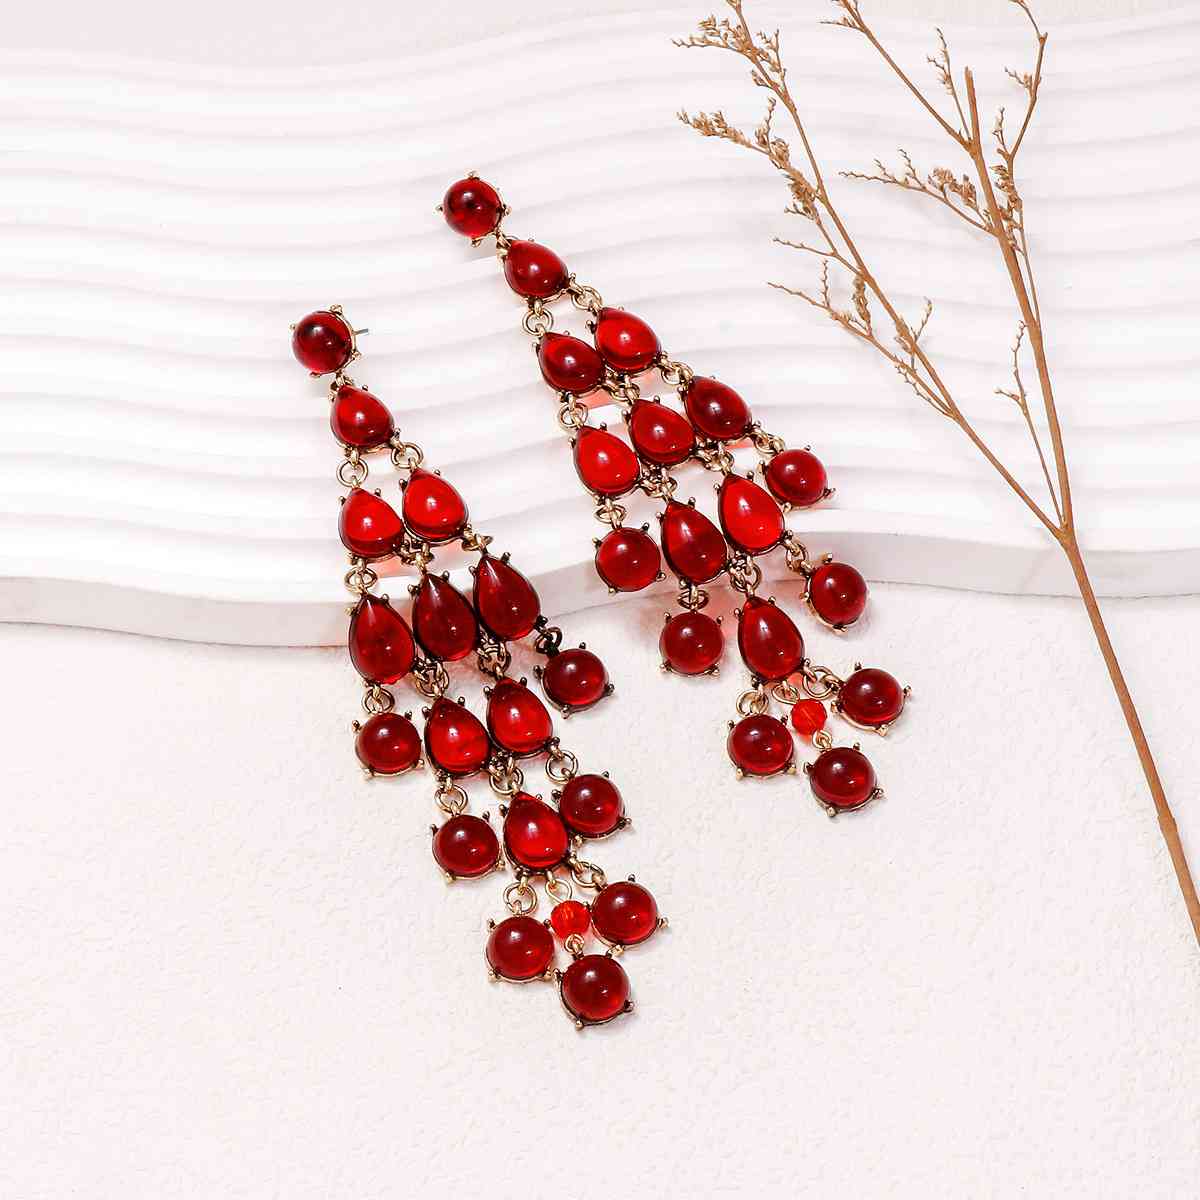 Long Golden Earring with 3 Layer of Crystal Red Pearls